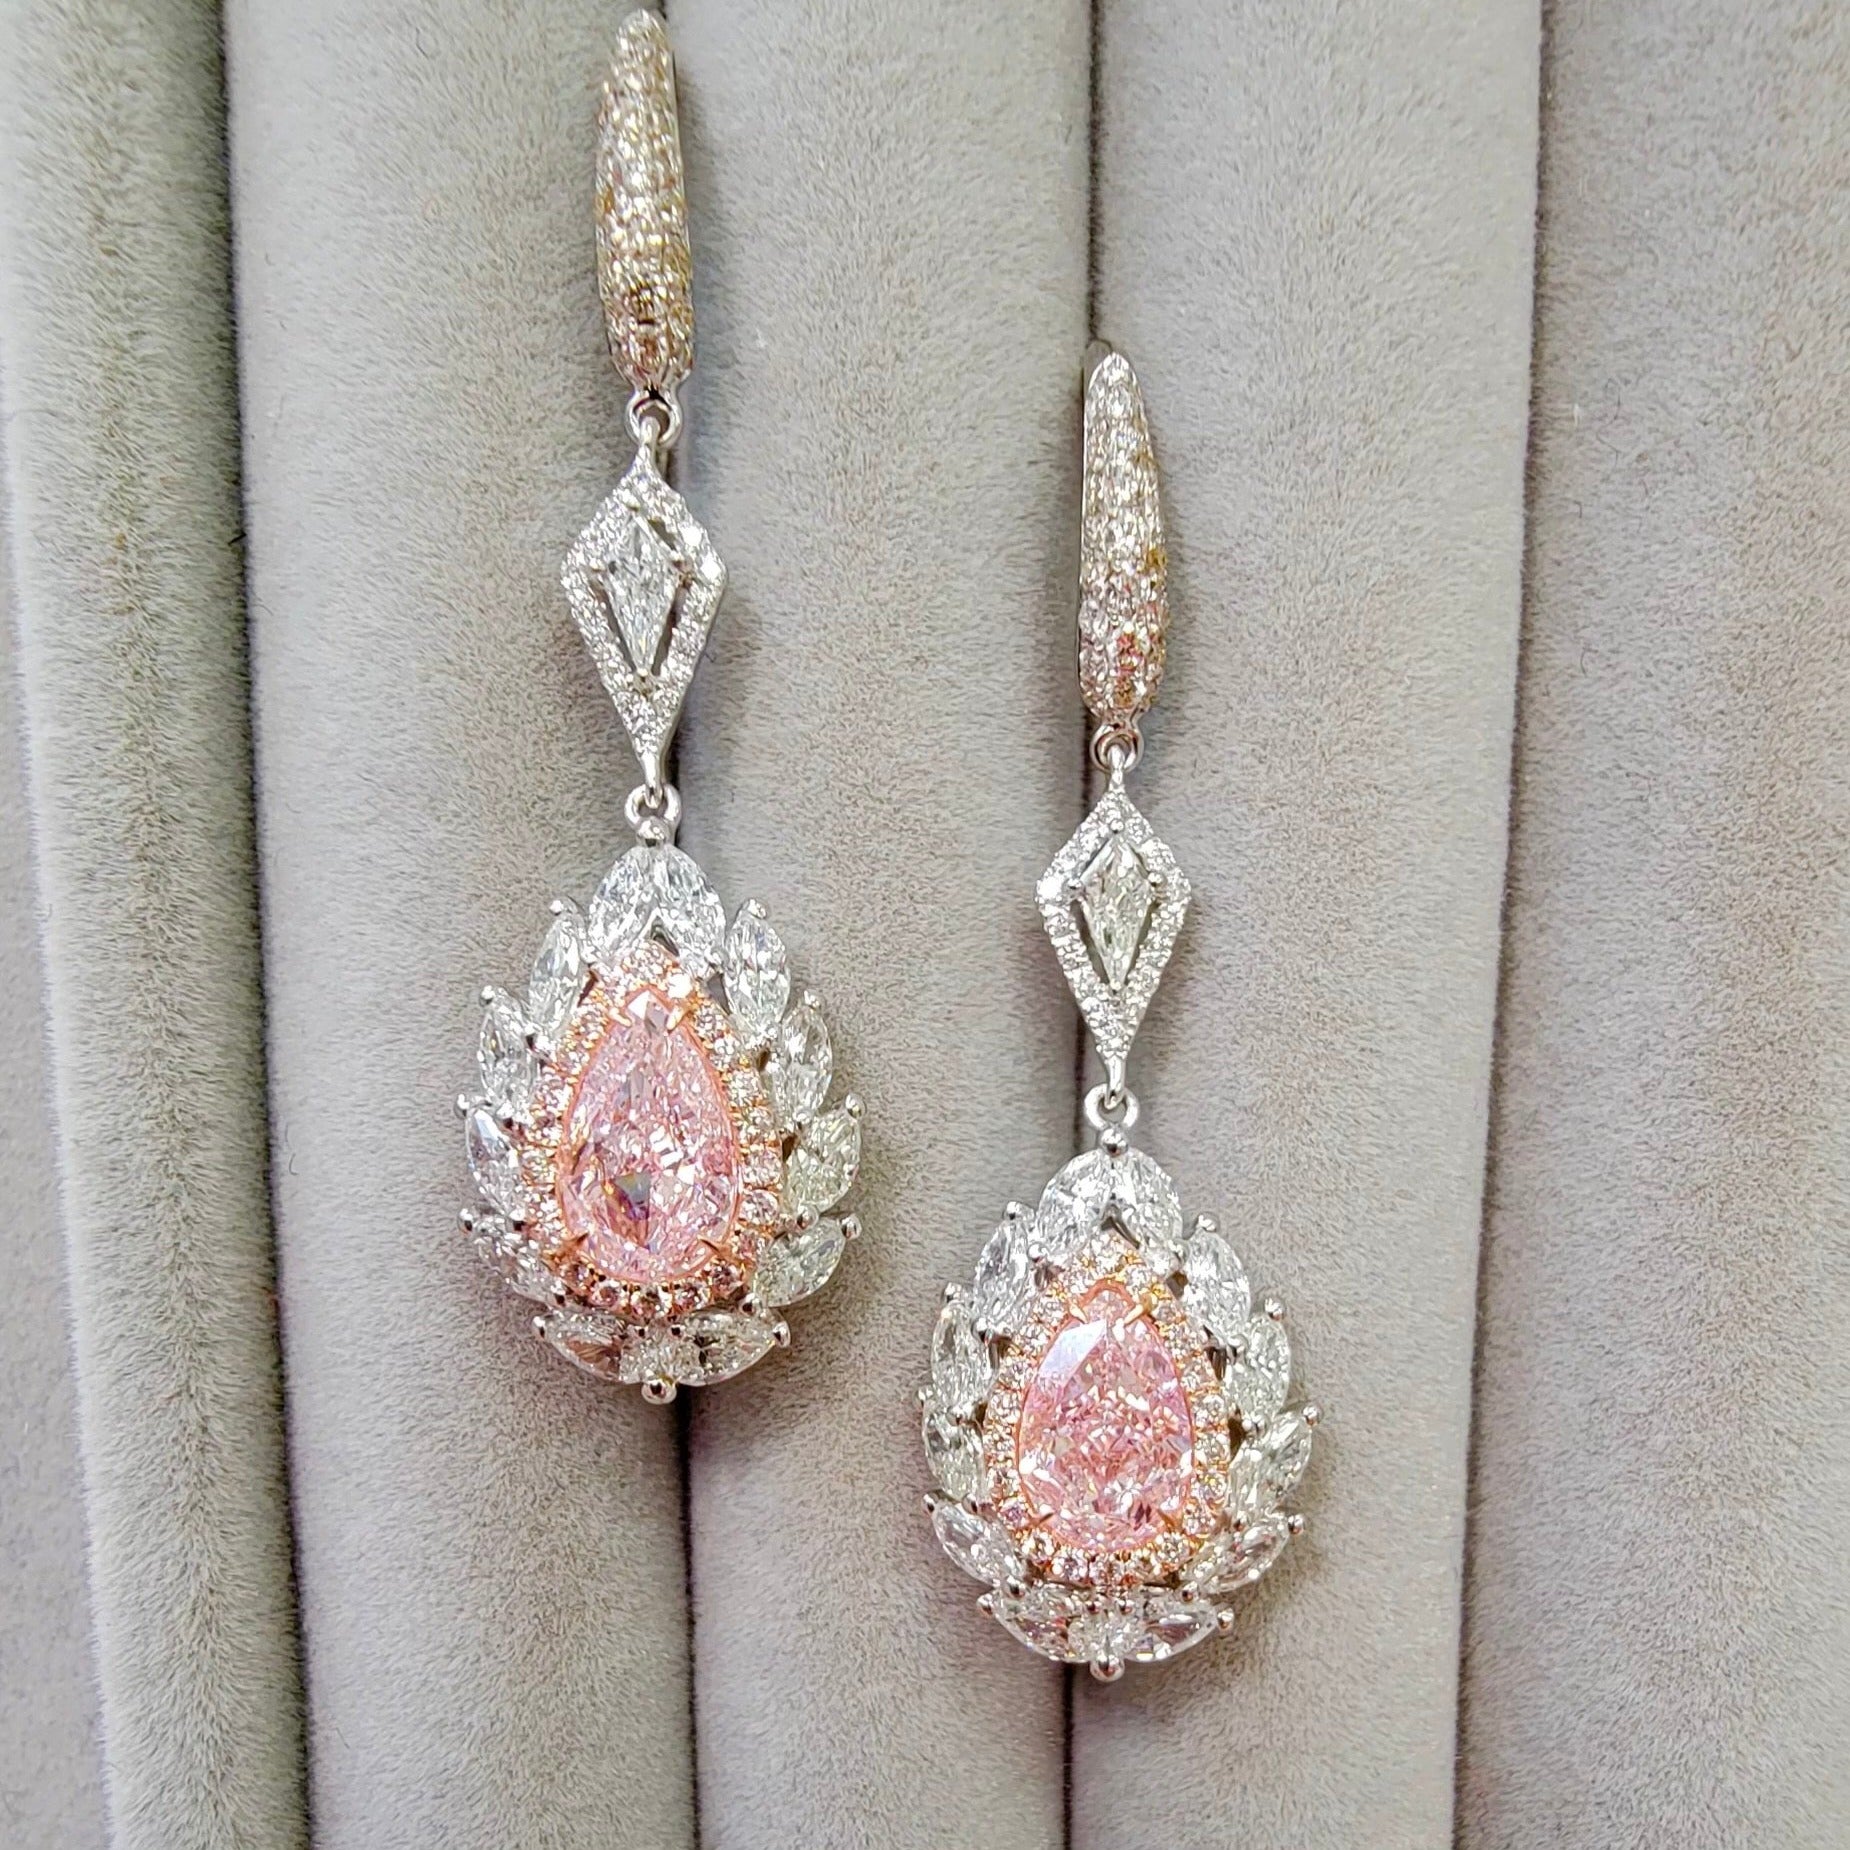 pink diamond earrings. pink diamonds. pink diamond jewelry. pink diamond studs. pink diamond drop earrings. pink and white diamond earrings. pink diamond pear shaoes.